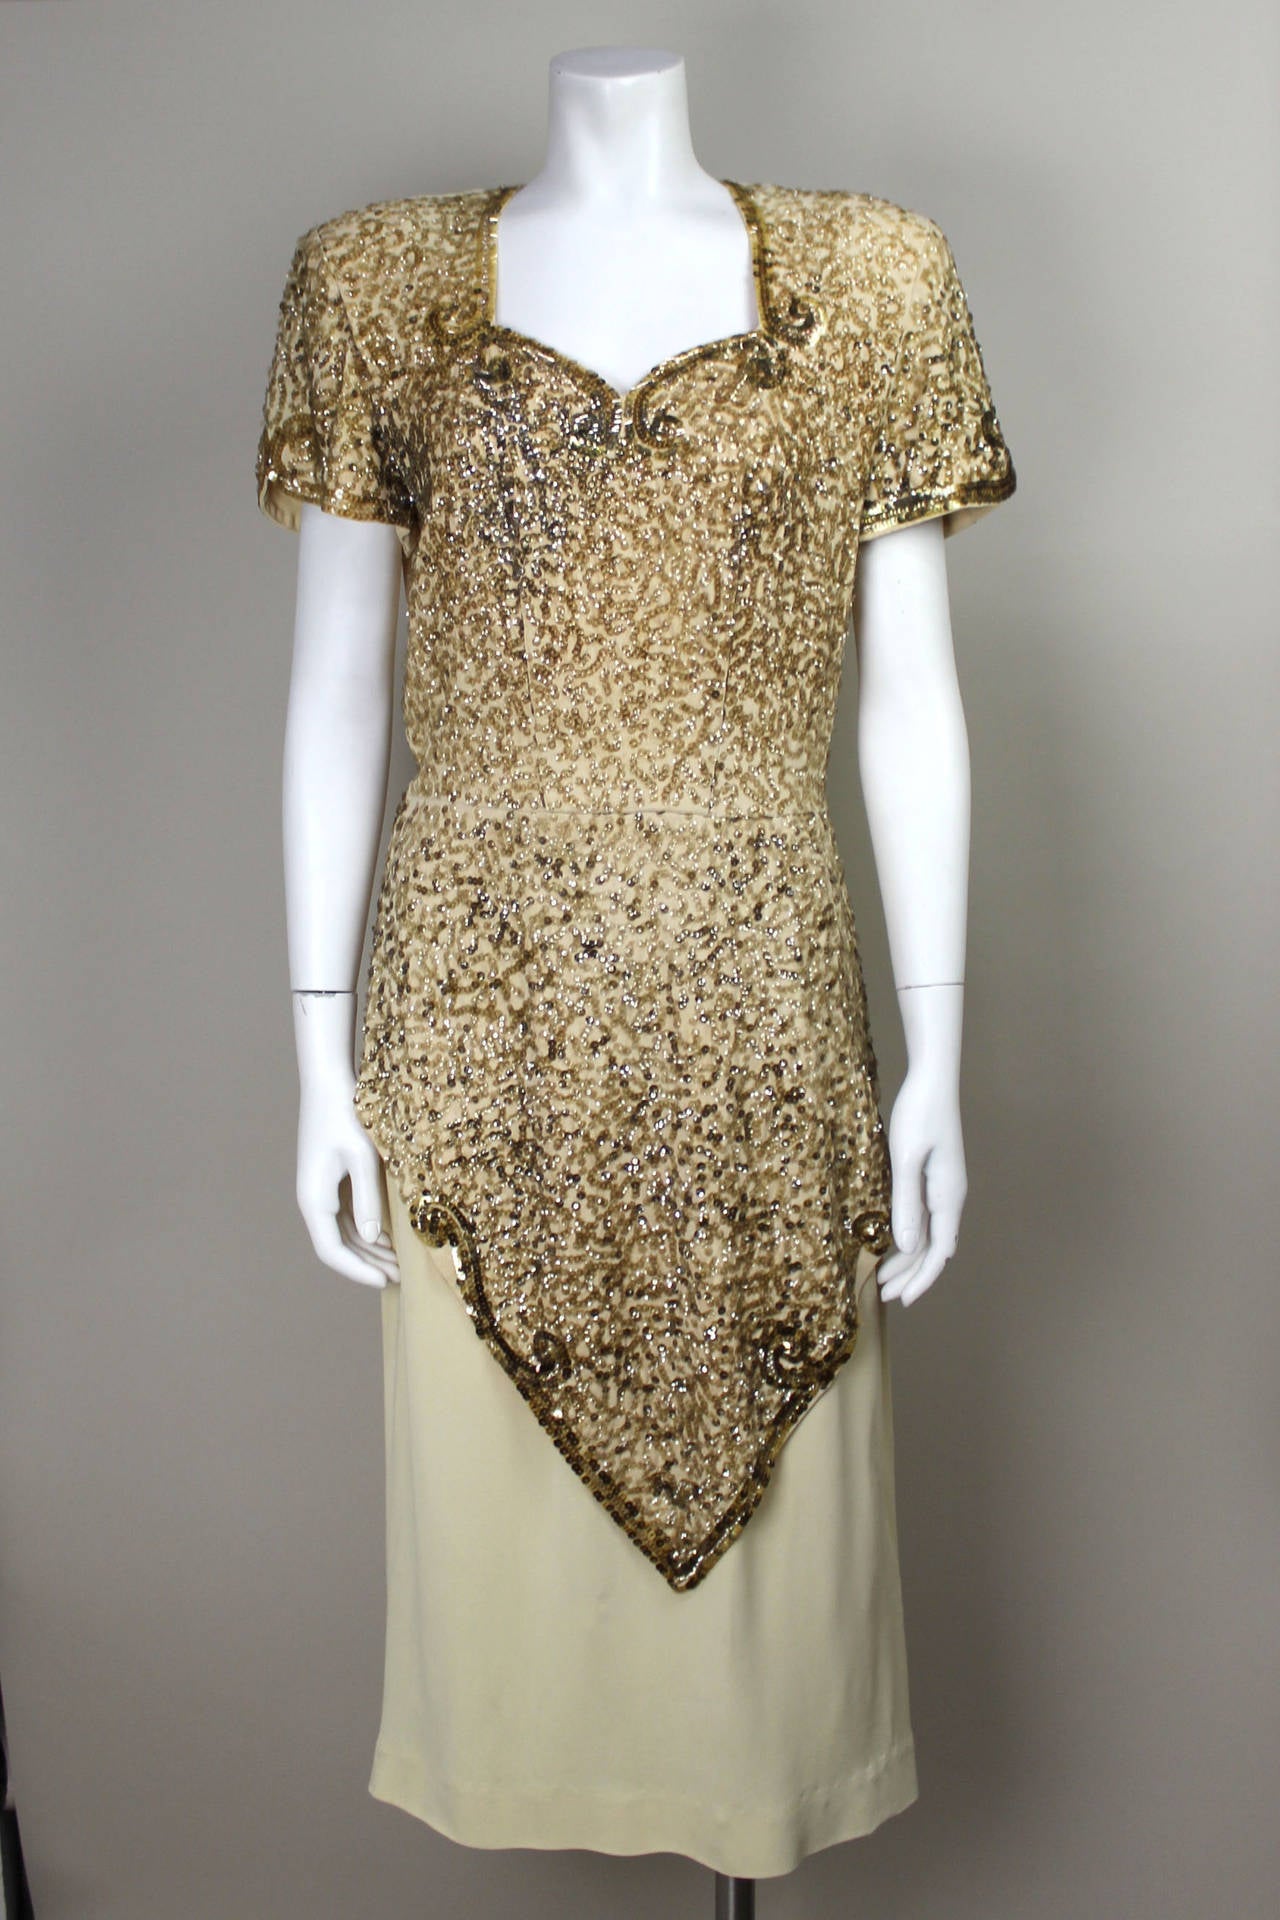 This creme rayon dress is embellished with an intricate design of hand stitched gold sequins. The style is pure 1940's glamour. The sleeves, sweetheart neckline, and front are all sequined ending in a draped overlay. A belt in the same creme rayon